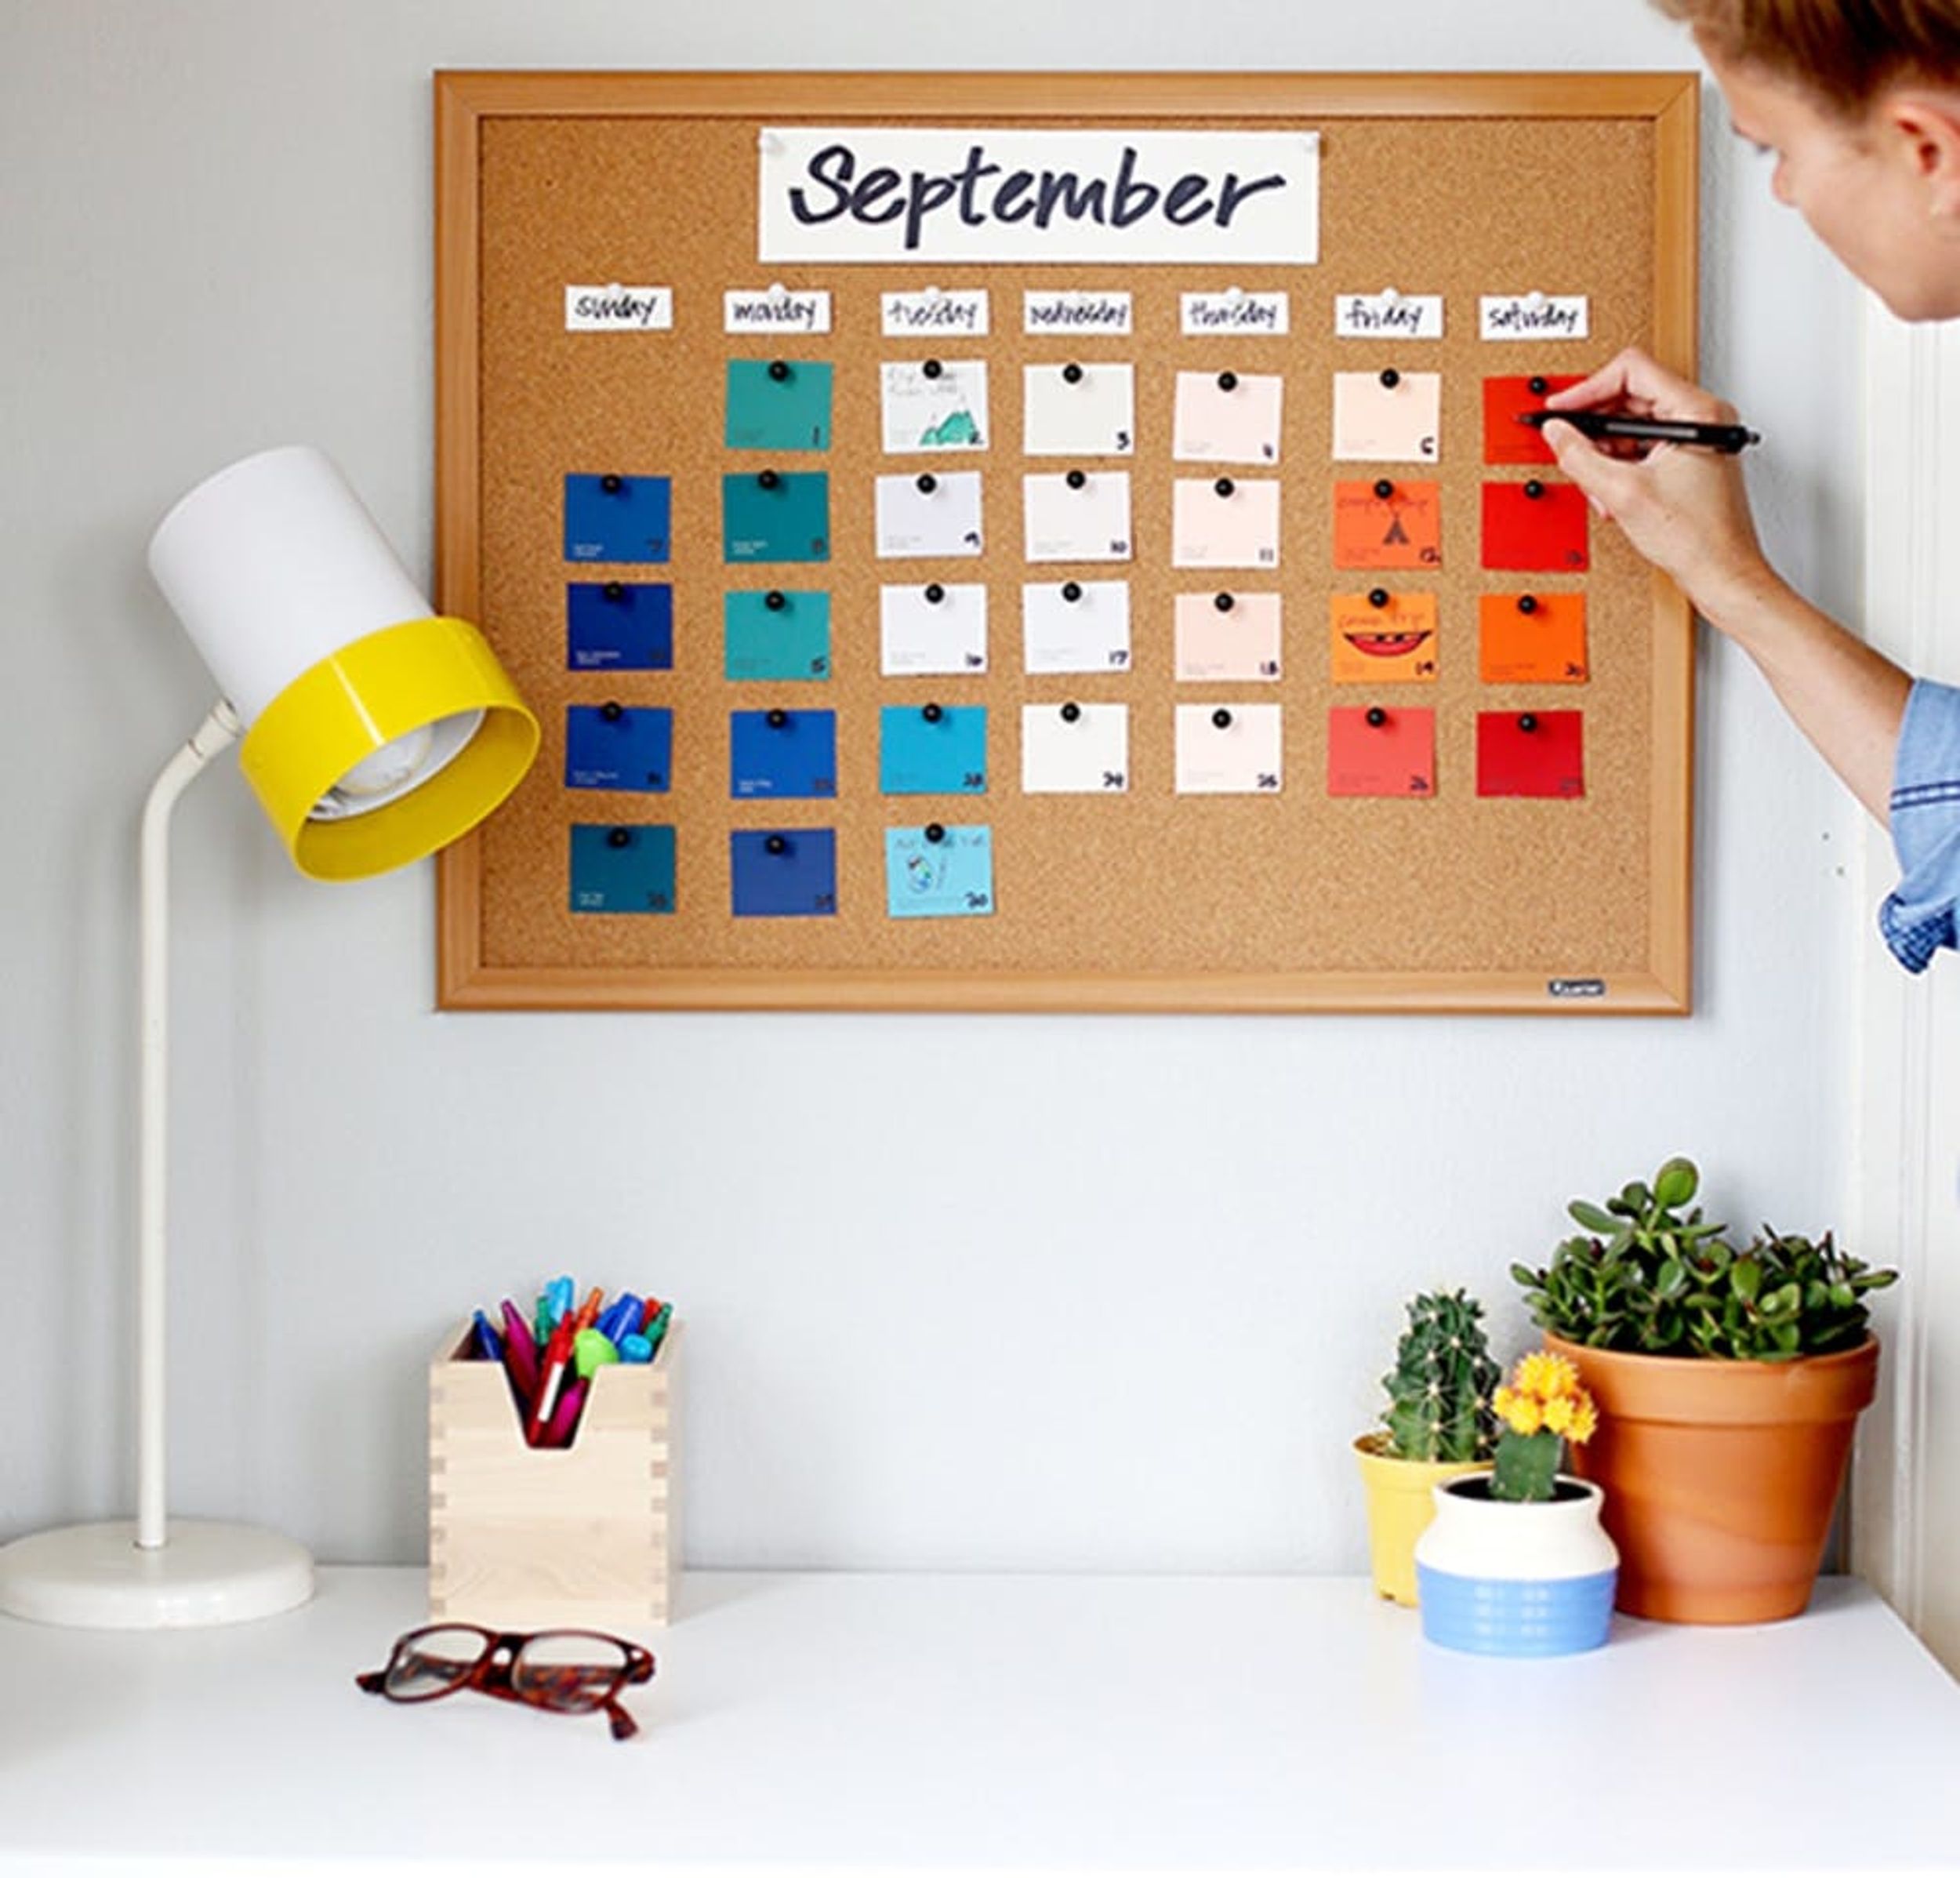 12 2015 Calendars to DIY Just in Time